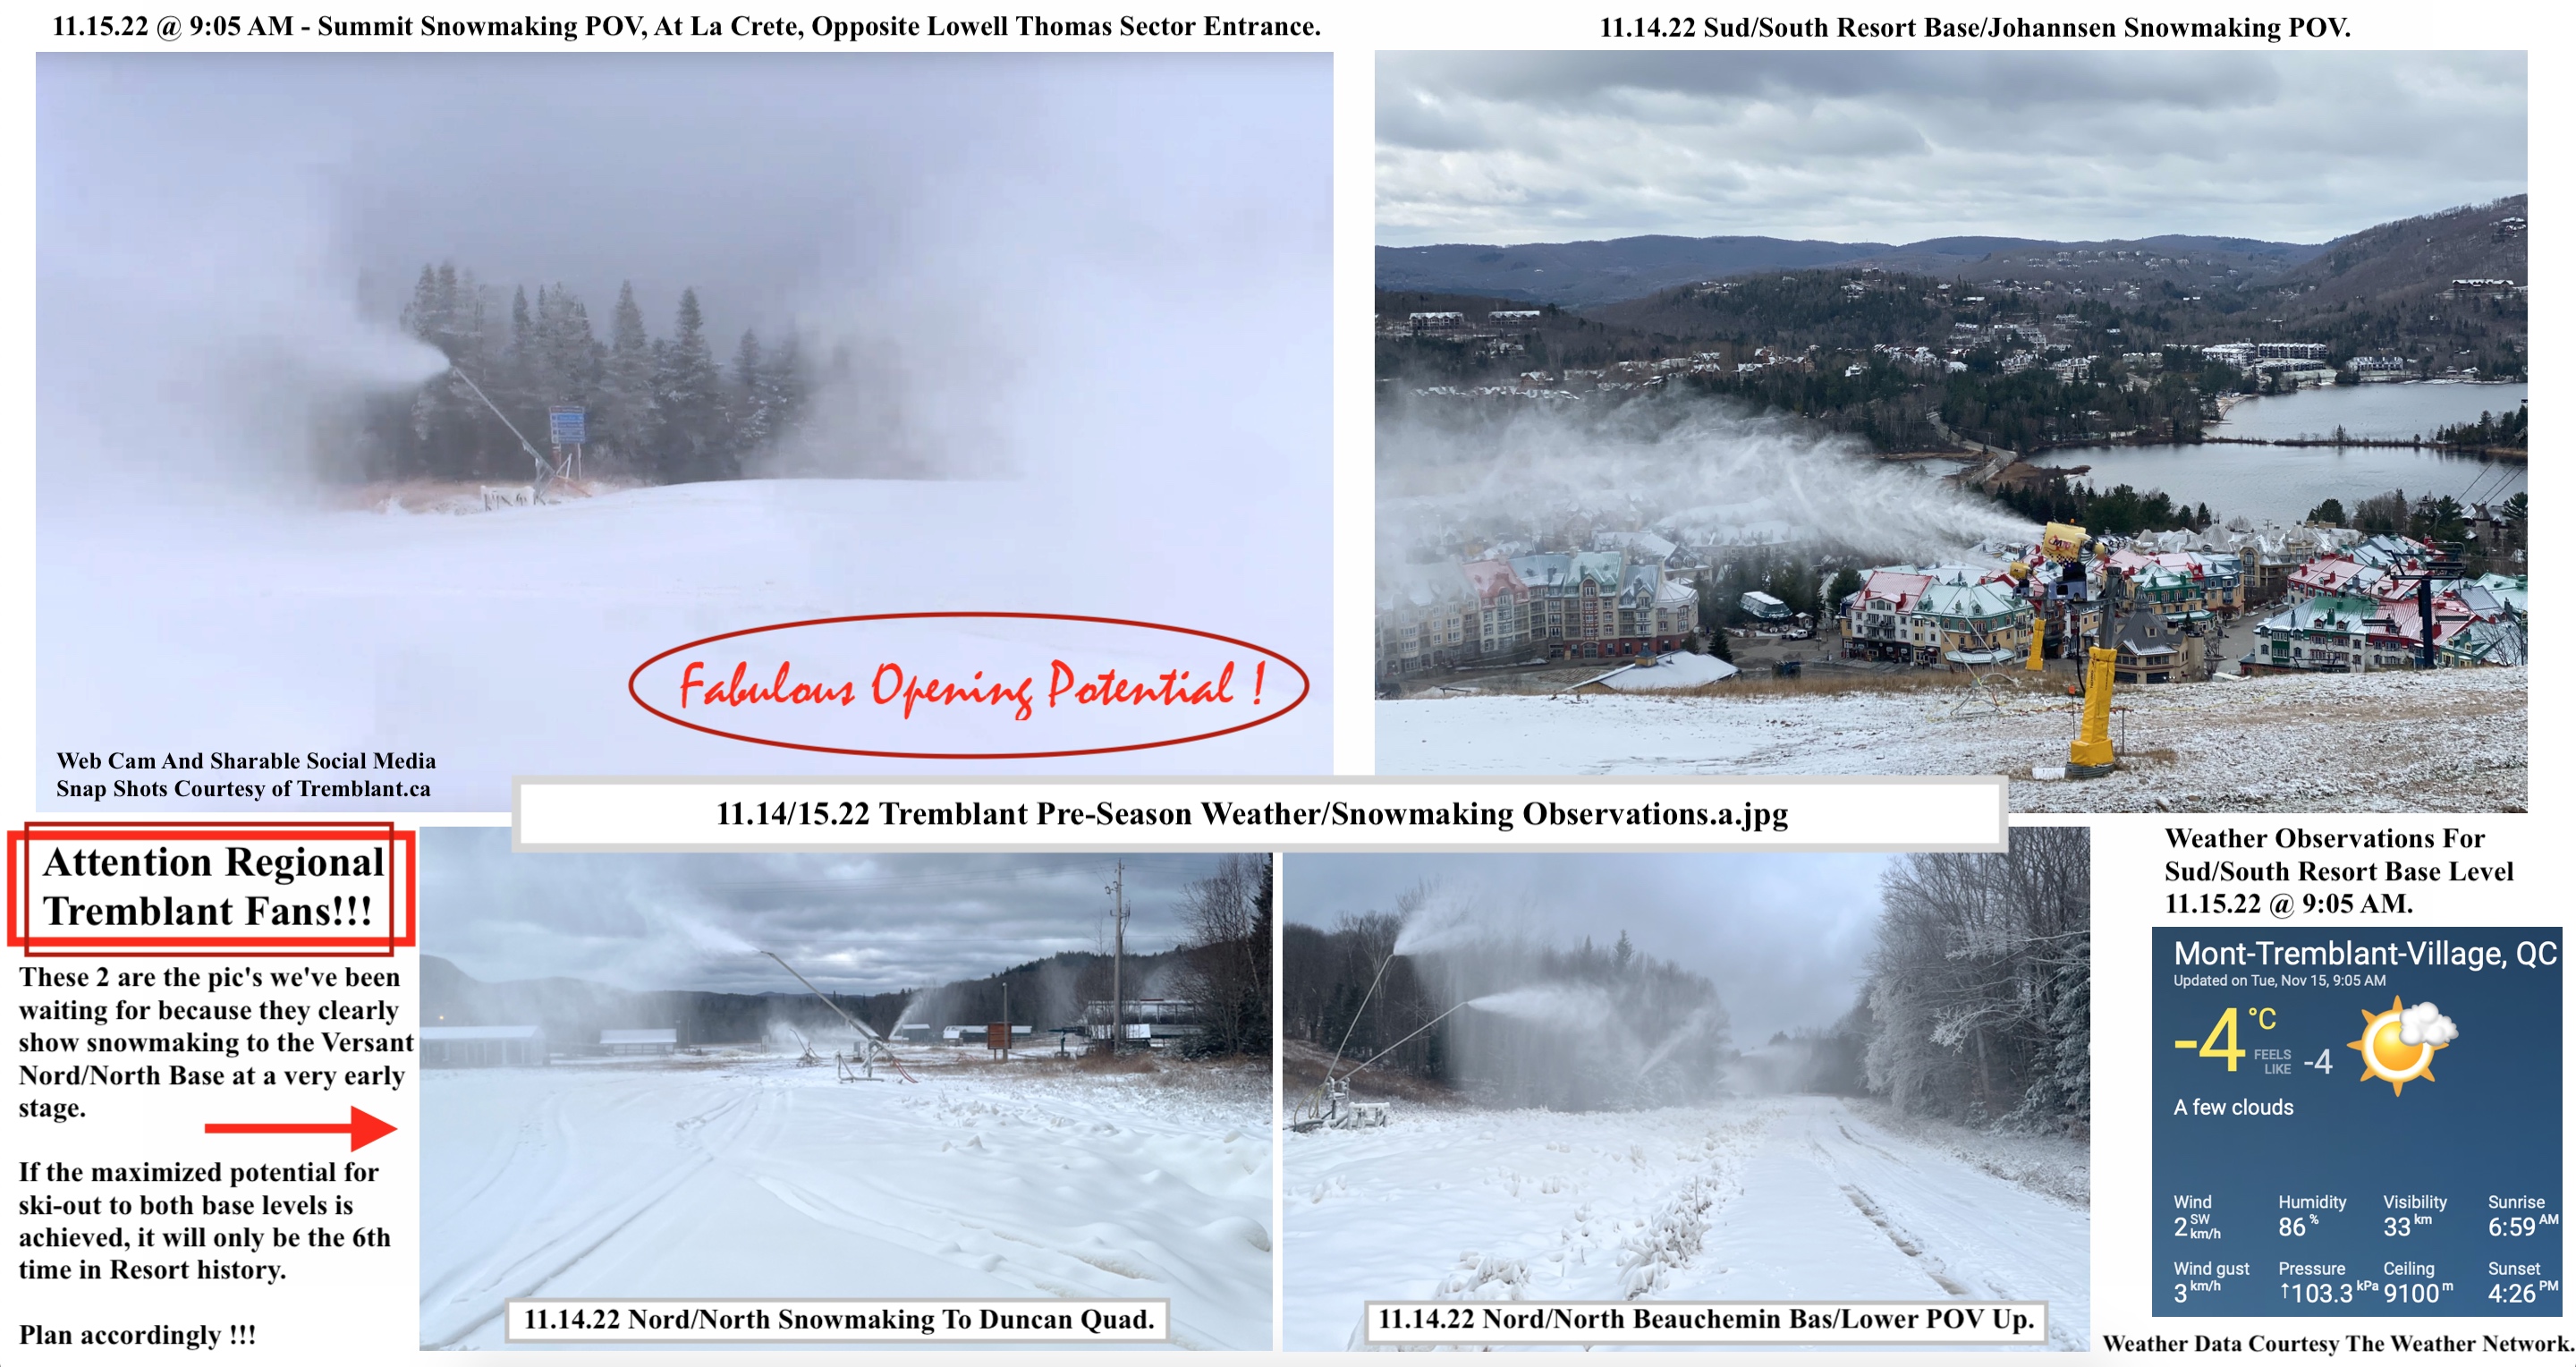 11.15.22.Snowmaking.Weather.Observations.Update.a.jpg